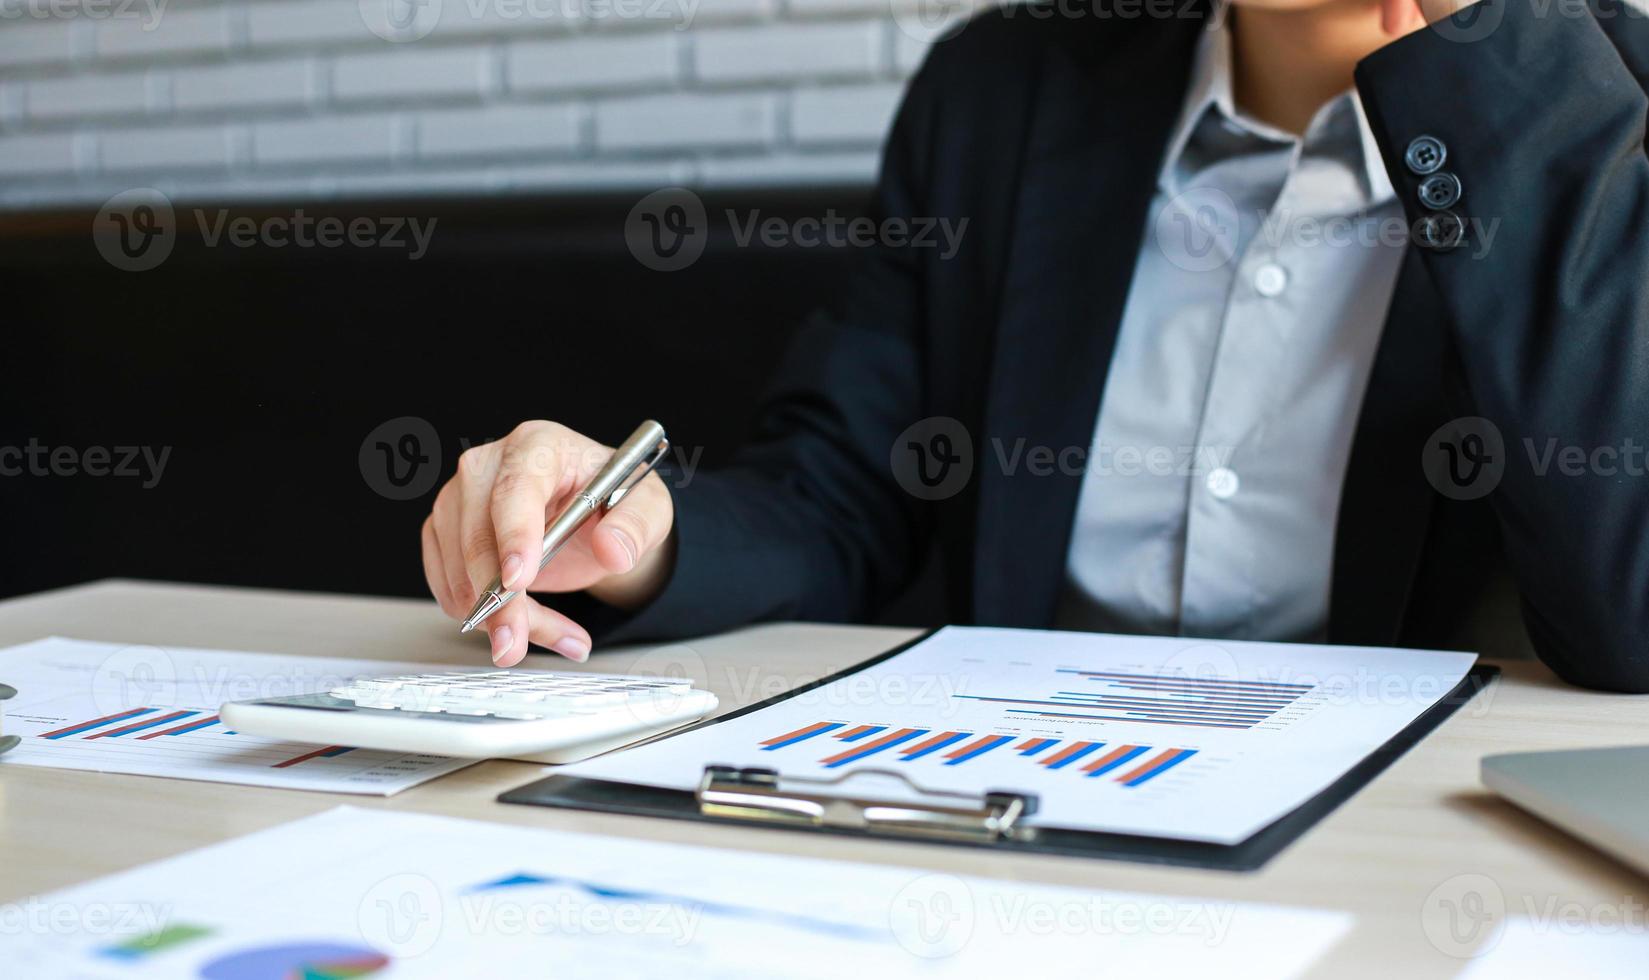 Accounting businessmen are calculating income-expenditure and analyzing real estate investment data, Dedicated to the progress and growth of the company, Financial and tax systems concept. photo